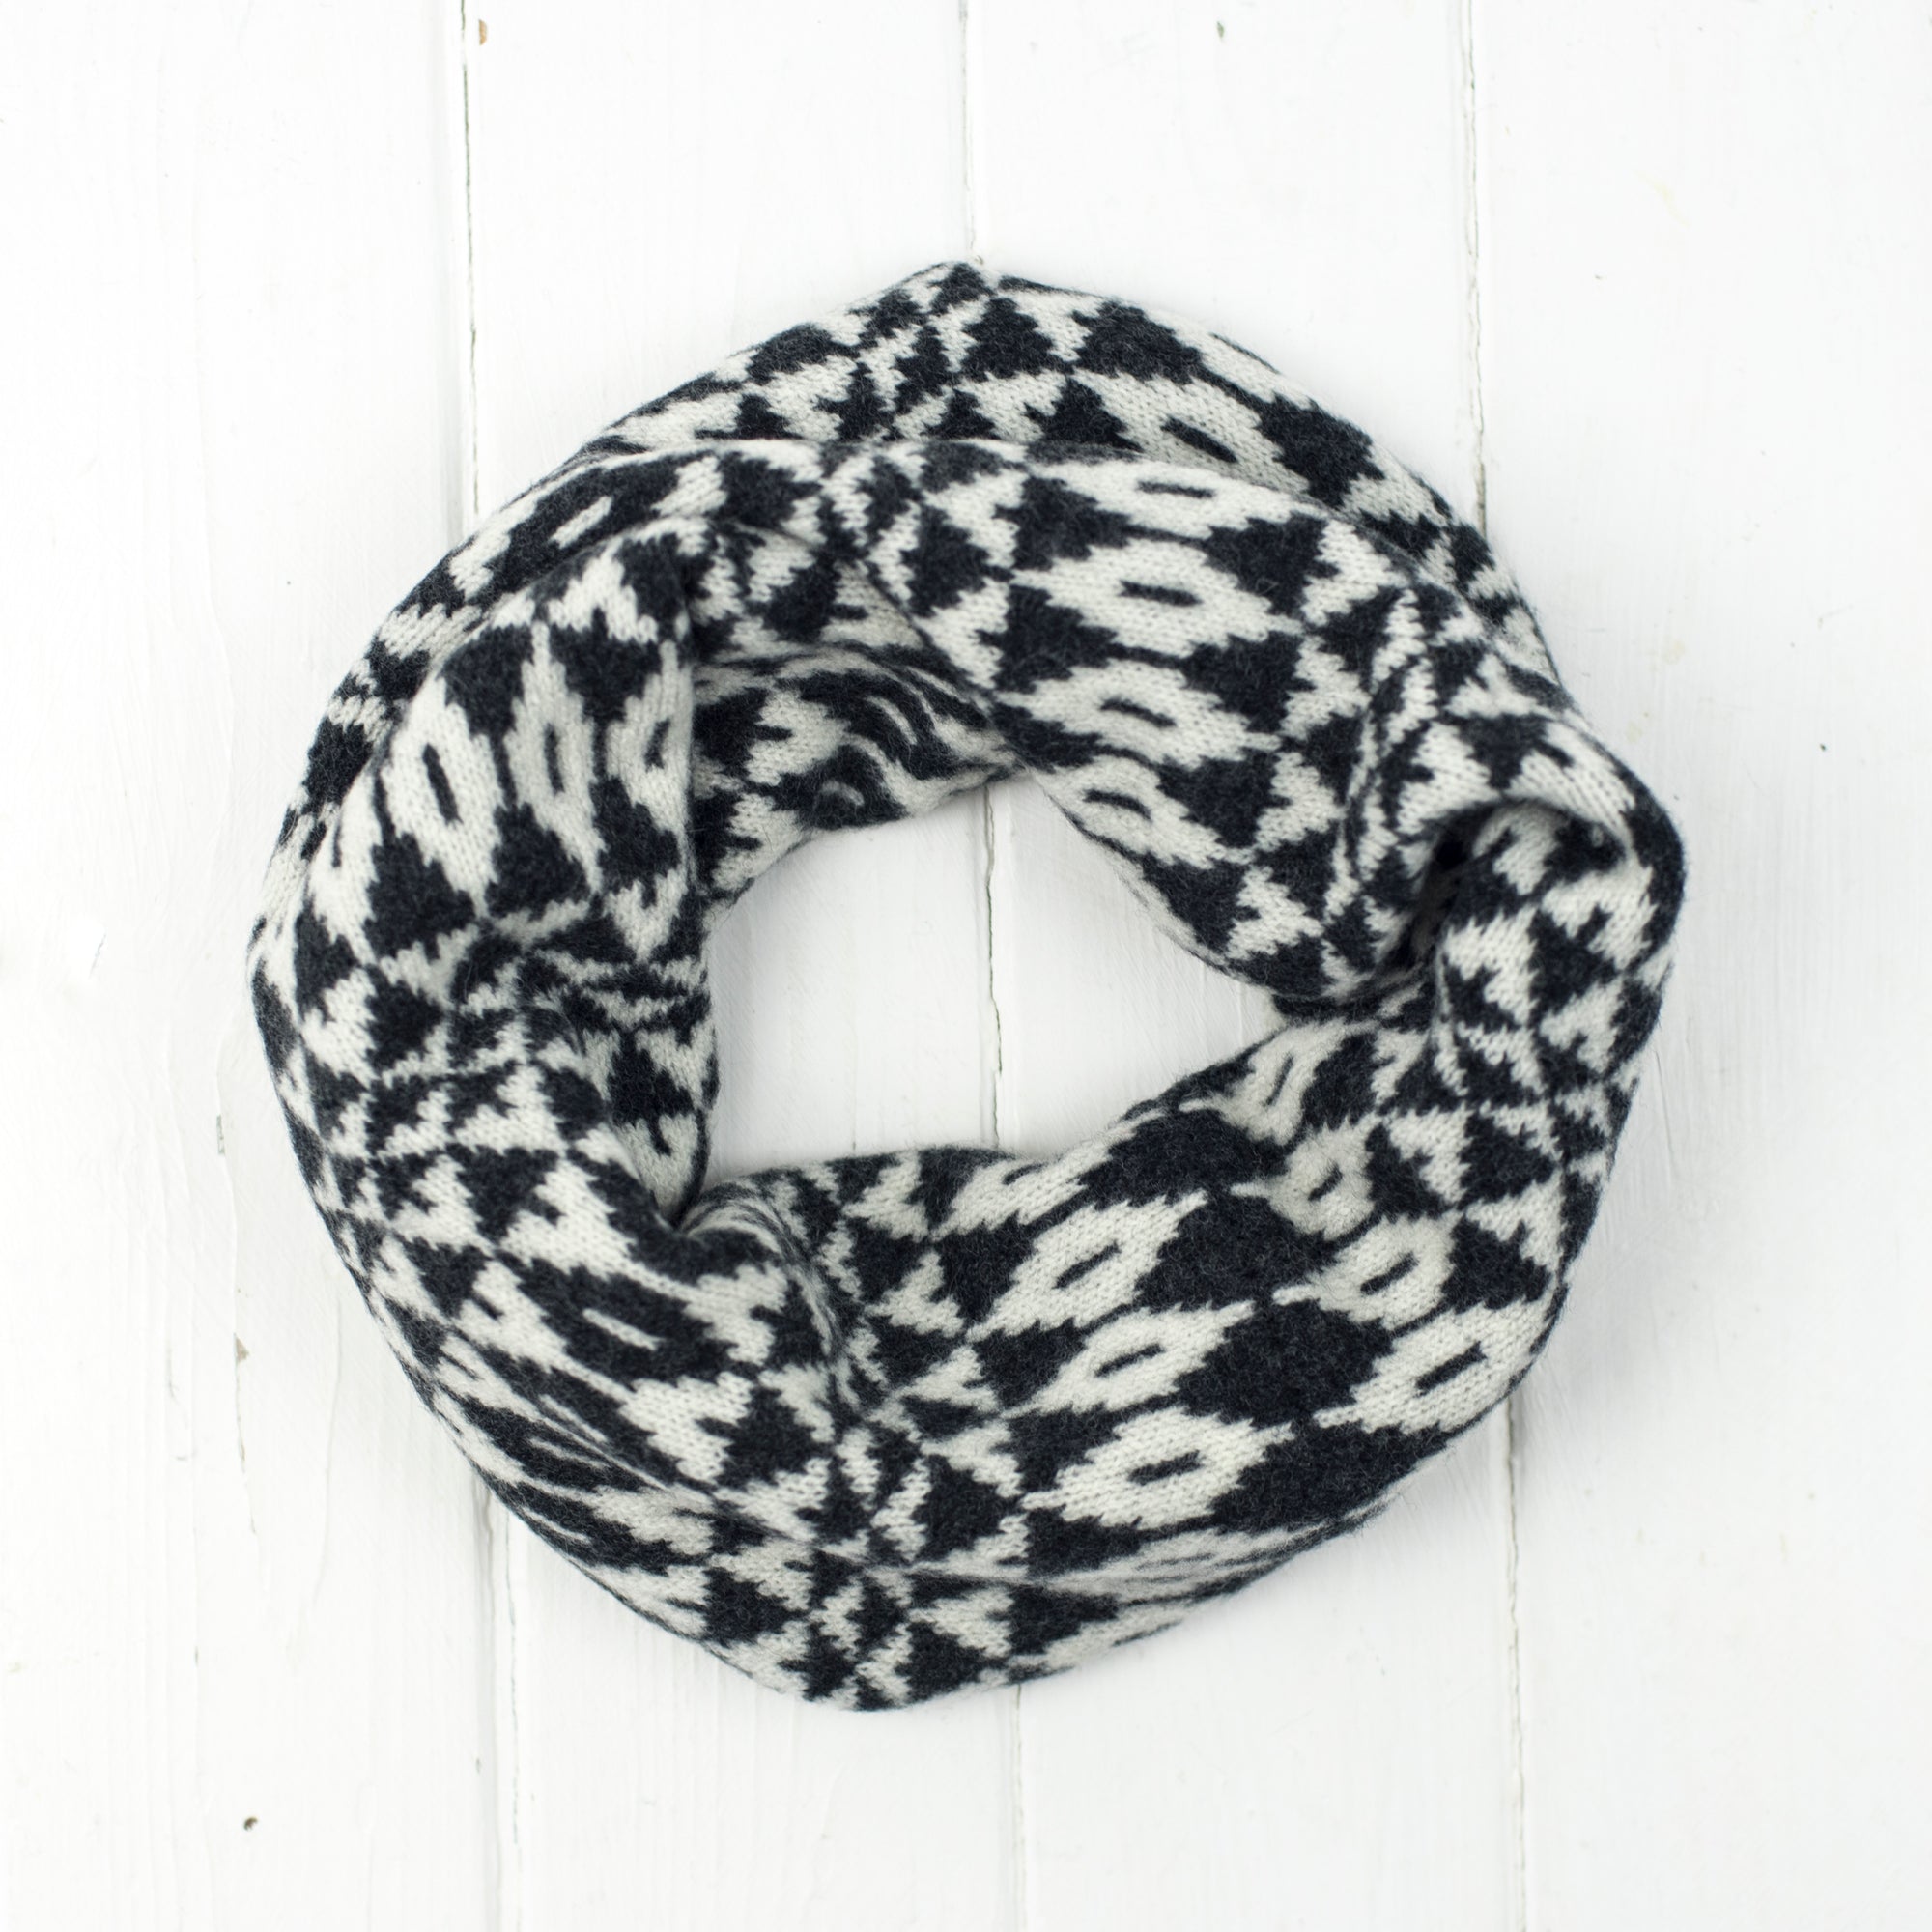 Mirror snood / cowl - monochrome (MADE TO ORDER)